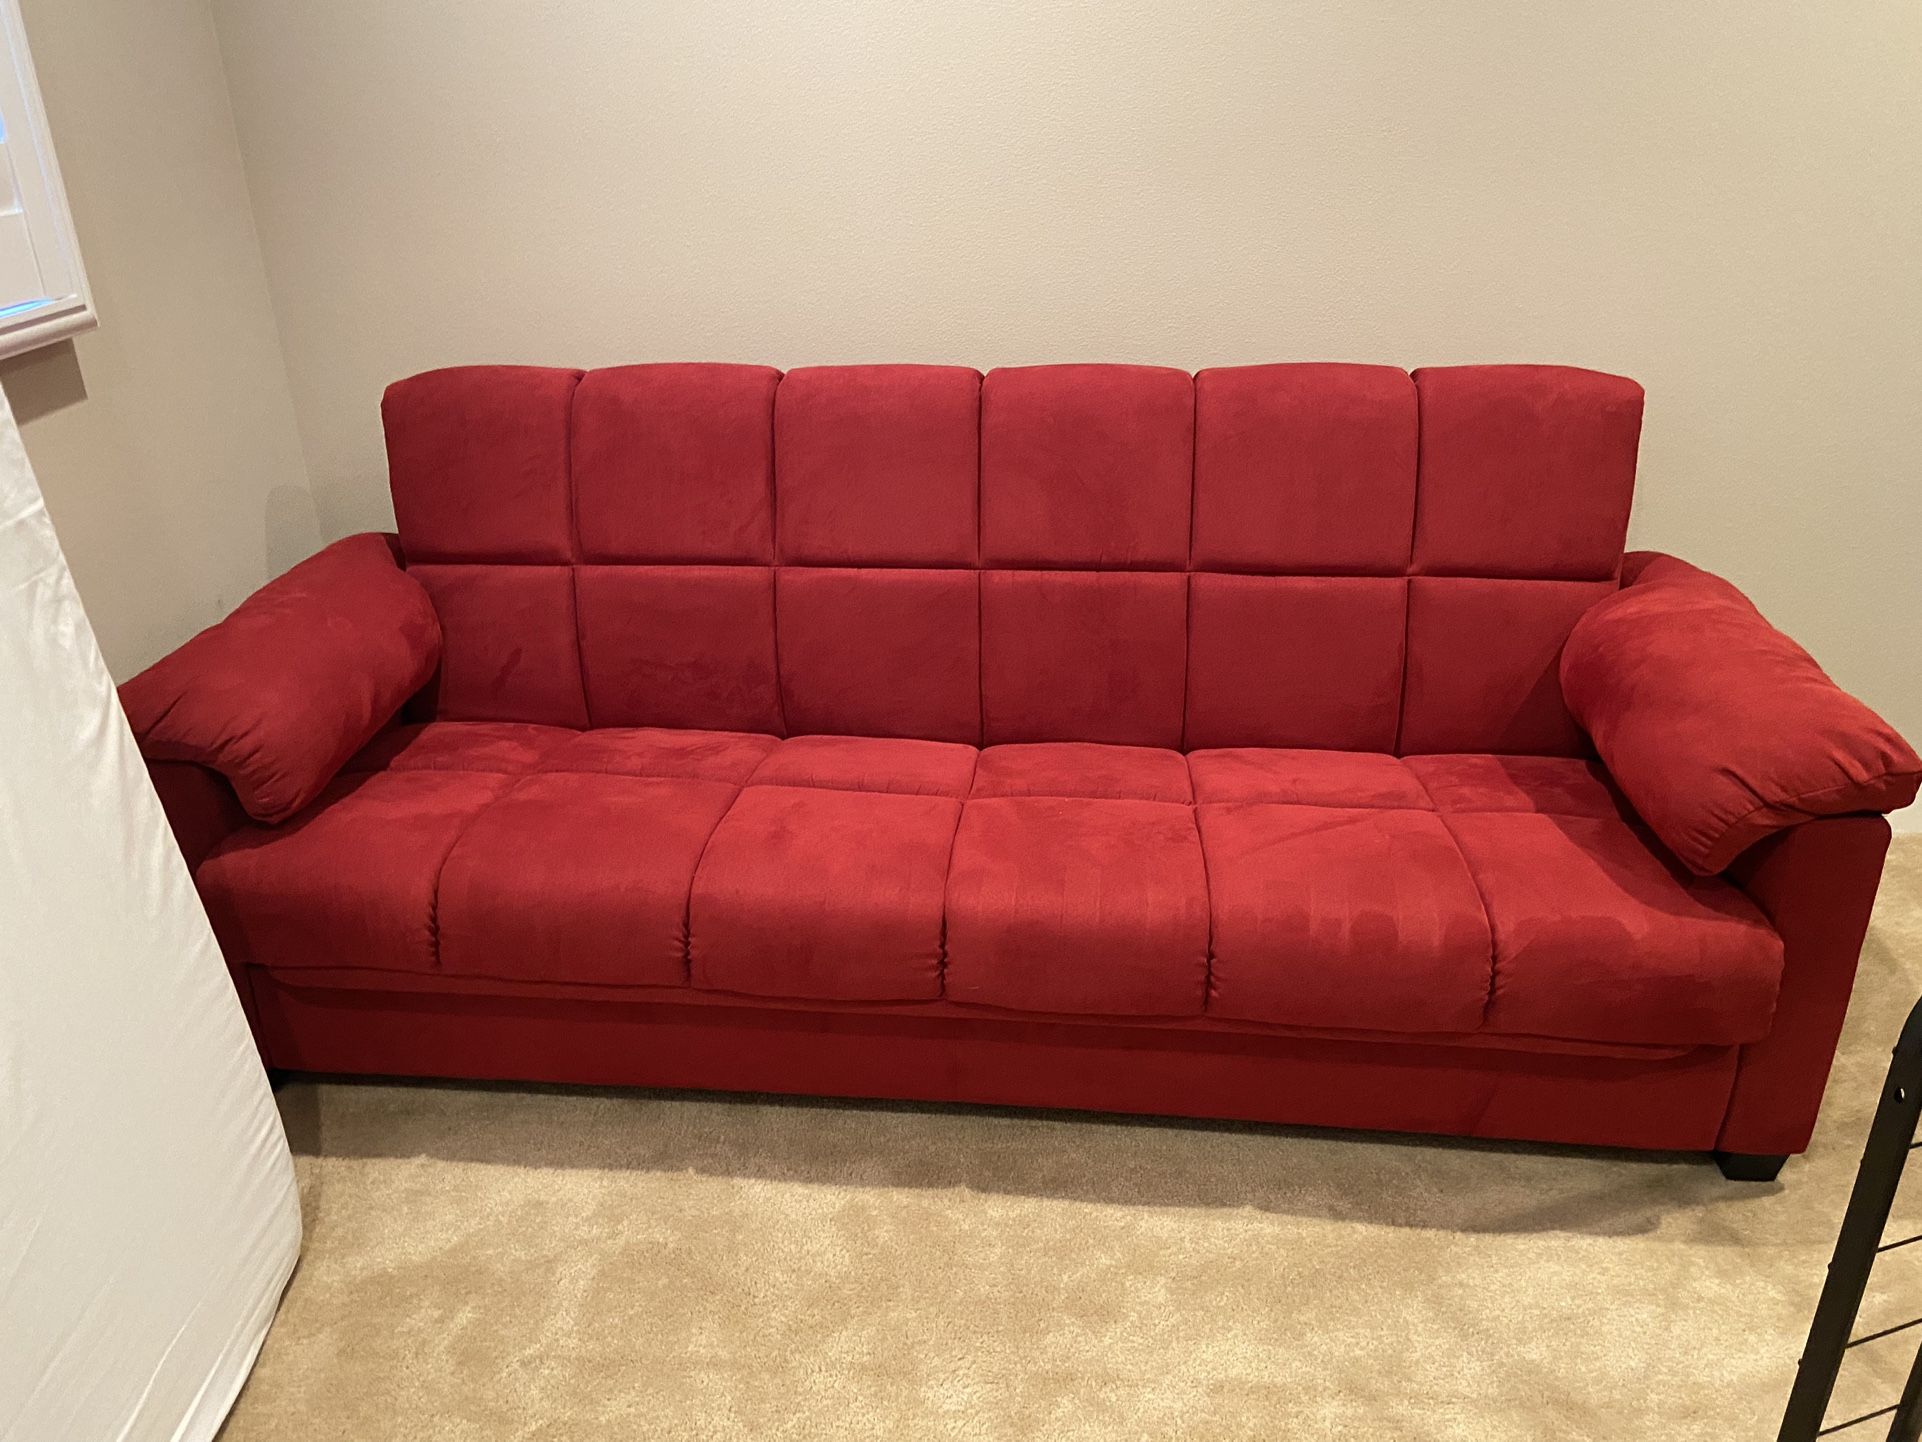 Red Burgundy Couch Futon Foldable New  